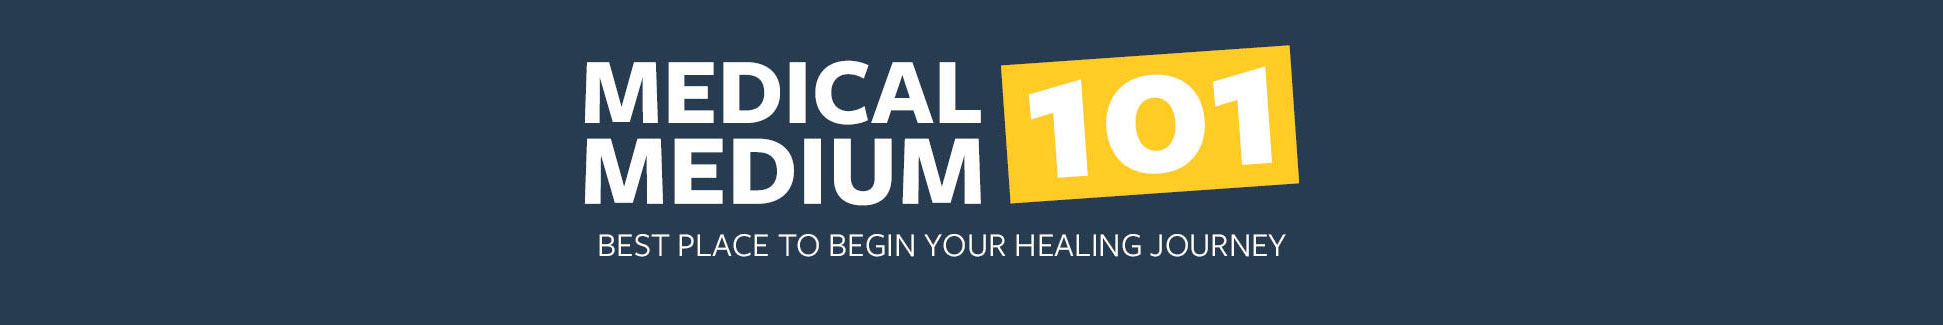 Medical Medium 101 - The Best Place to Begin Your Healing Journey